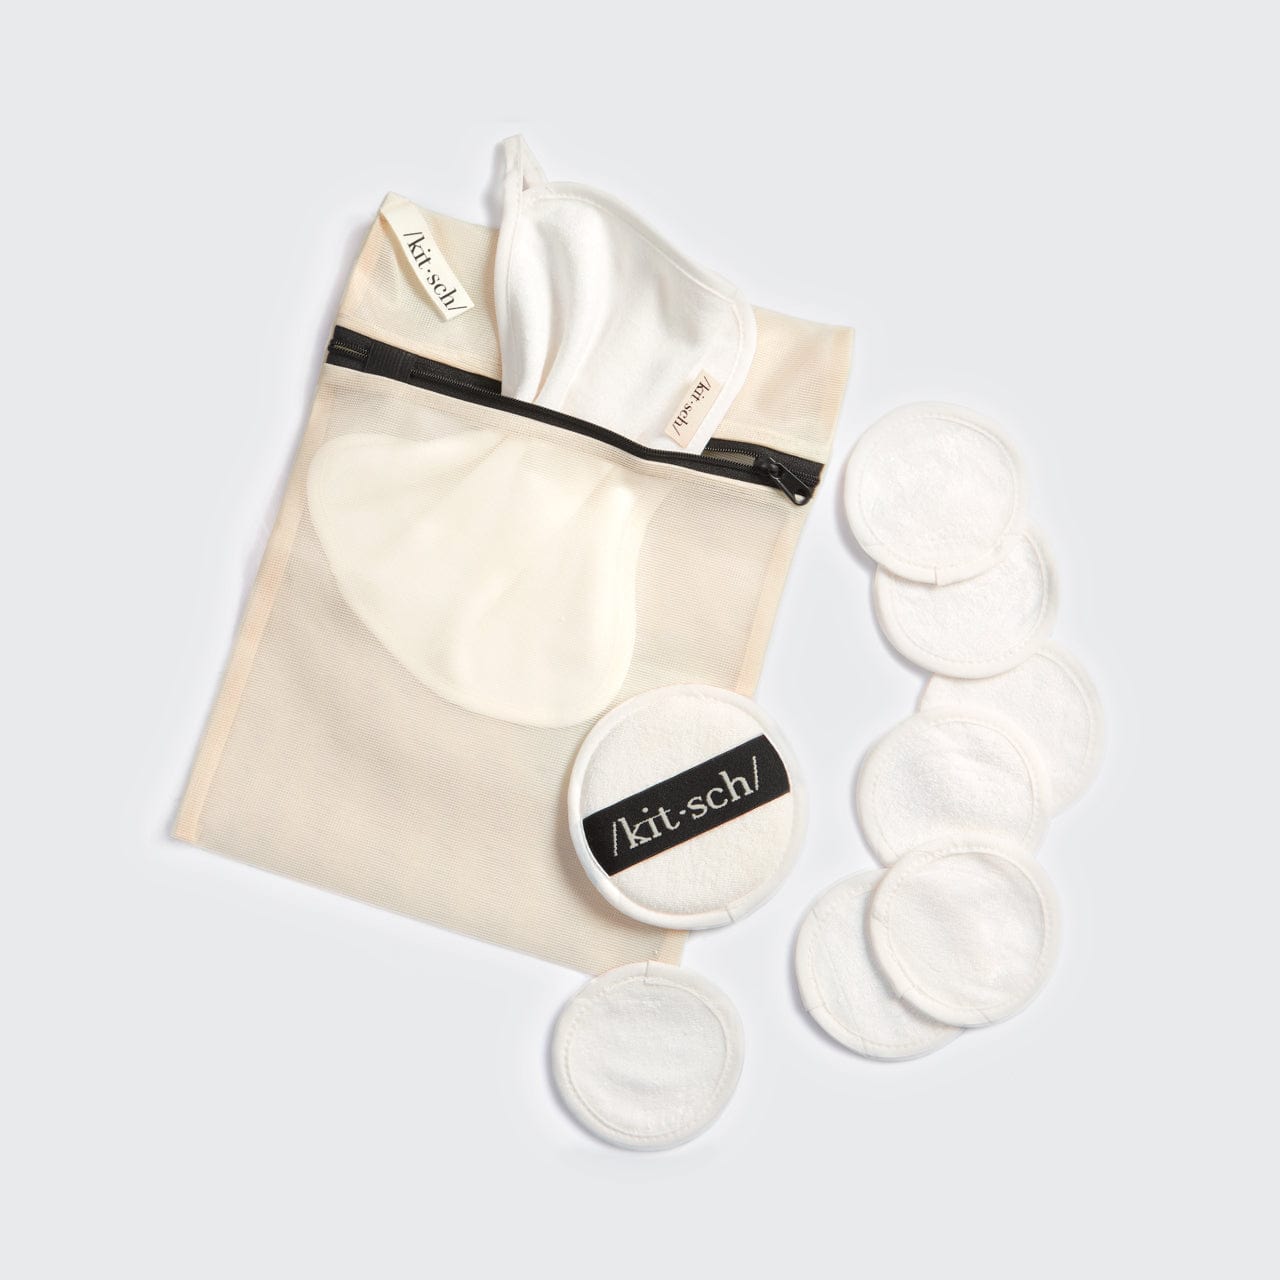 KITSCH: Eco-Friendly Ultimate Cleansing Kit